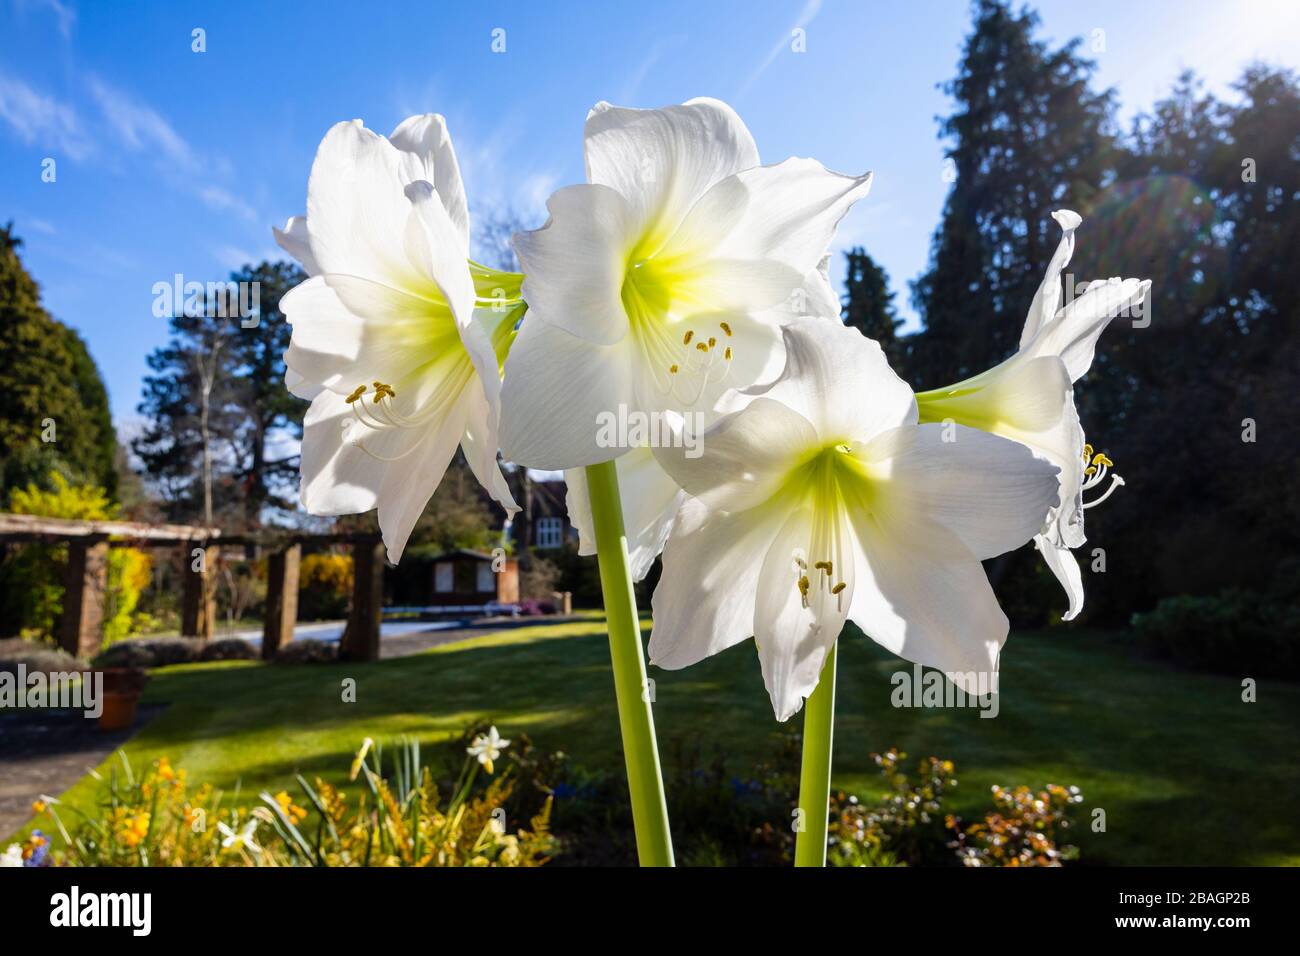 Large white amaryllis (Hippeastrum) in flower, close-up view, photographed outside in a garden on a sunny spring day Stock Photo